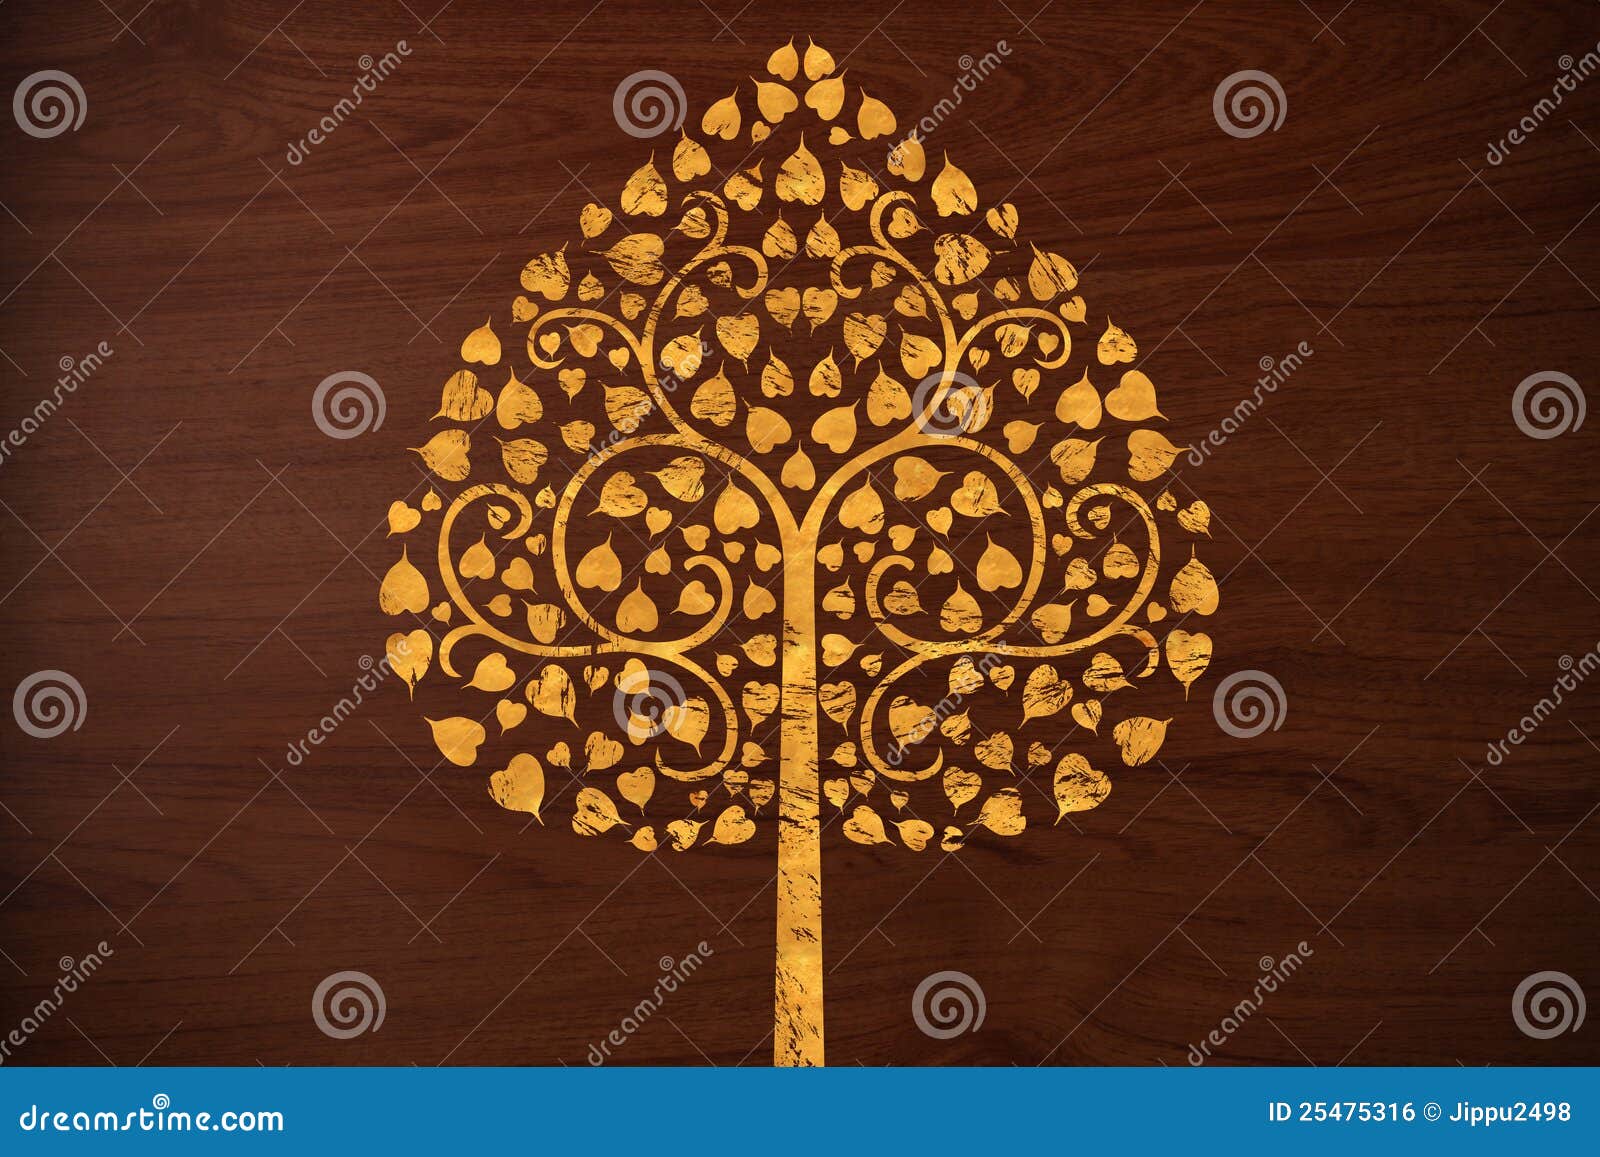 pattern carve gold tree on wood texture